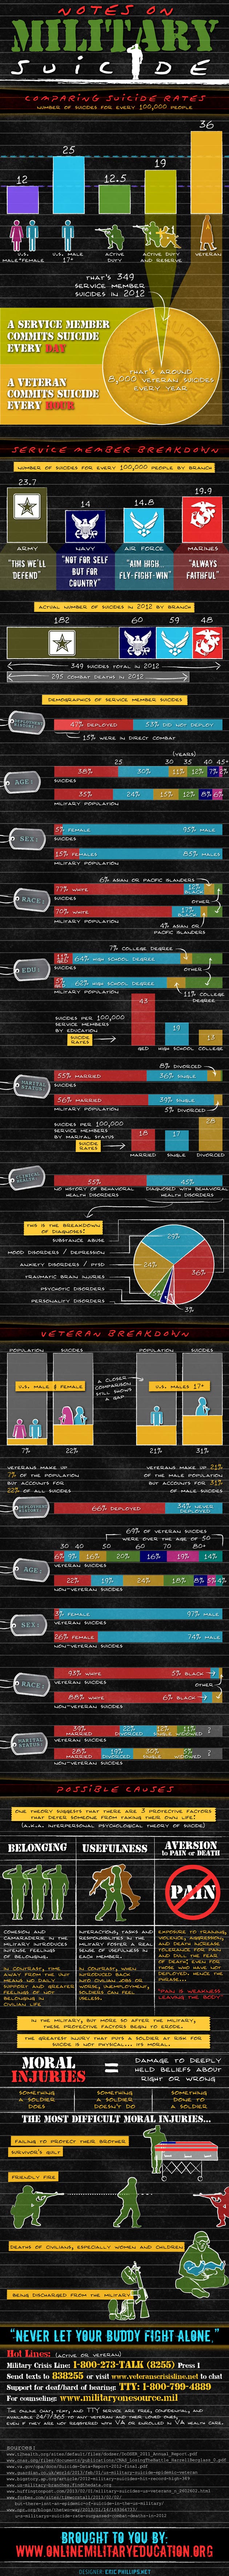 US Military Suicide 2012-Infographic